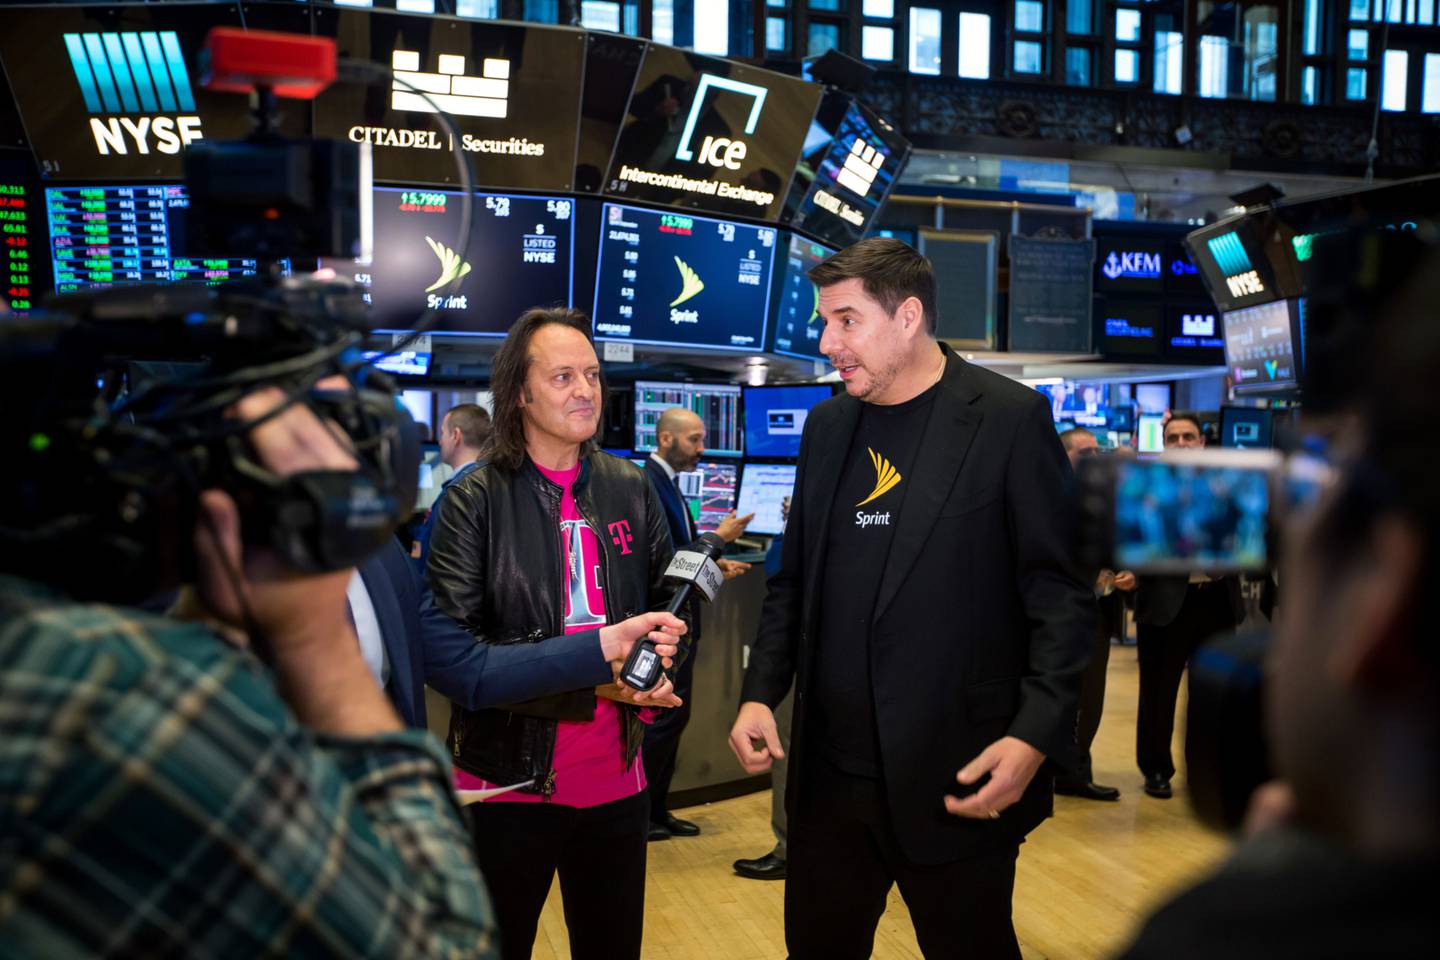 Claure, right, and John Legere, then-CEO of T-Mobile, during an interview on the floor of the NYSE in 2018.dfd